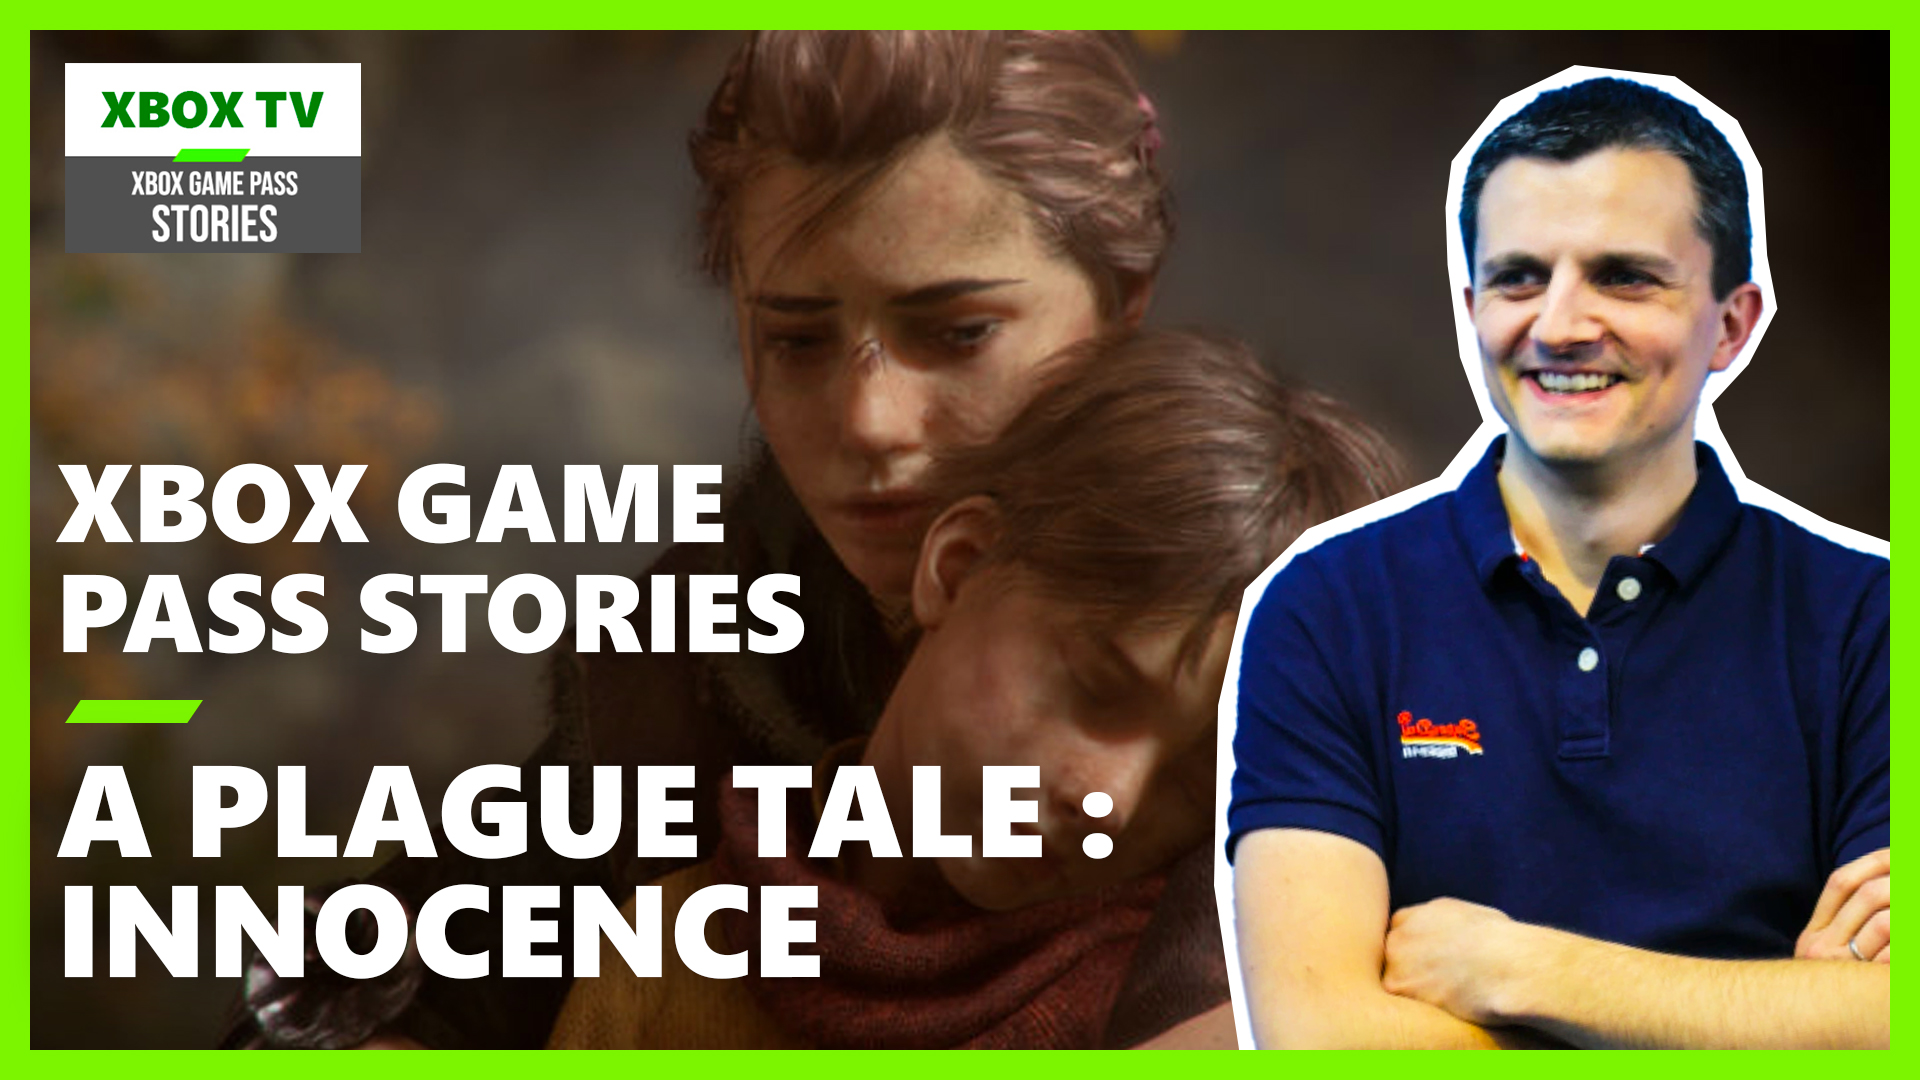 Xbox Game Pass Stories : A Plague Tale: Innocence